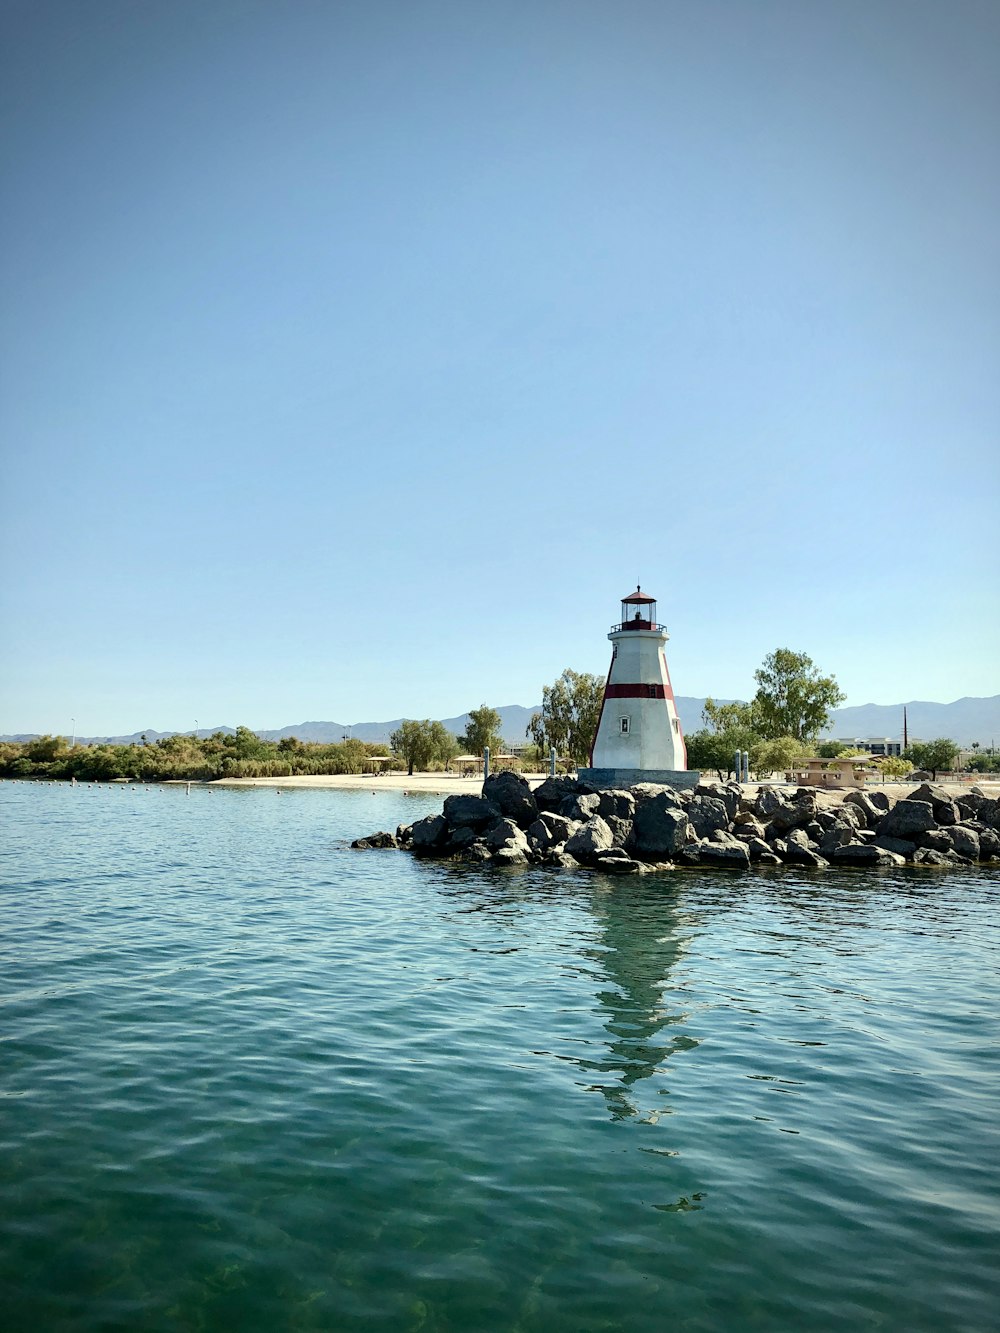 white and red lighthouse near body of water during daytime